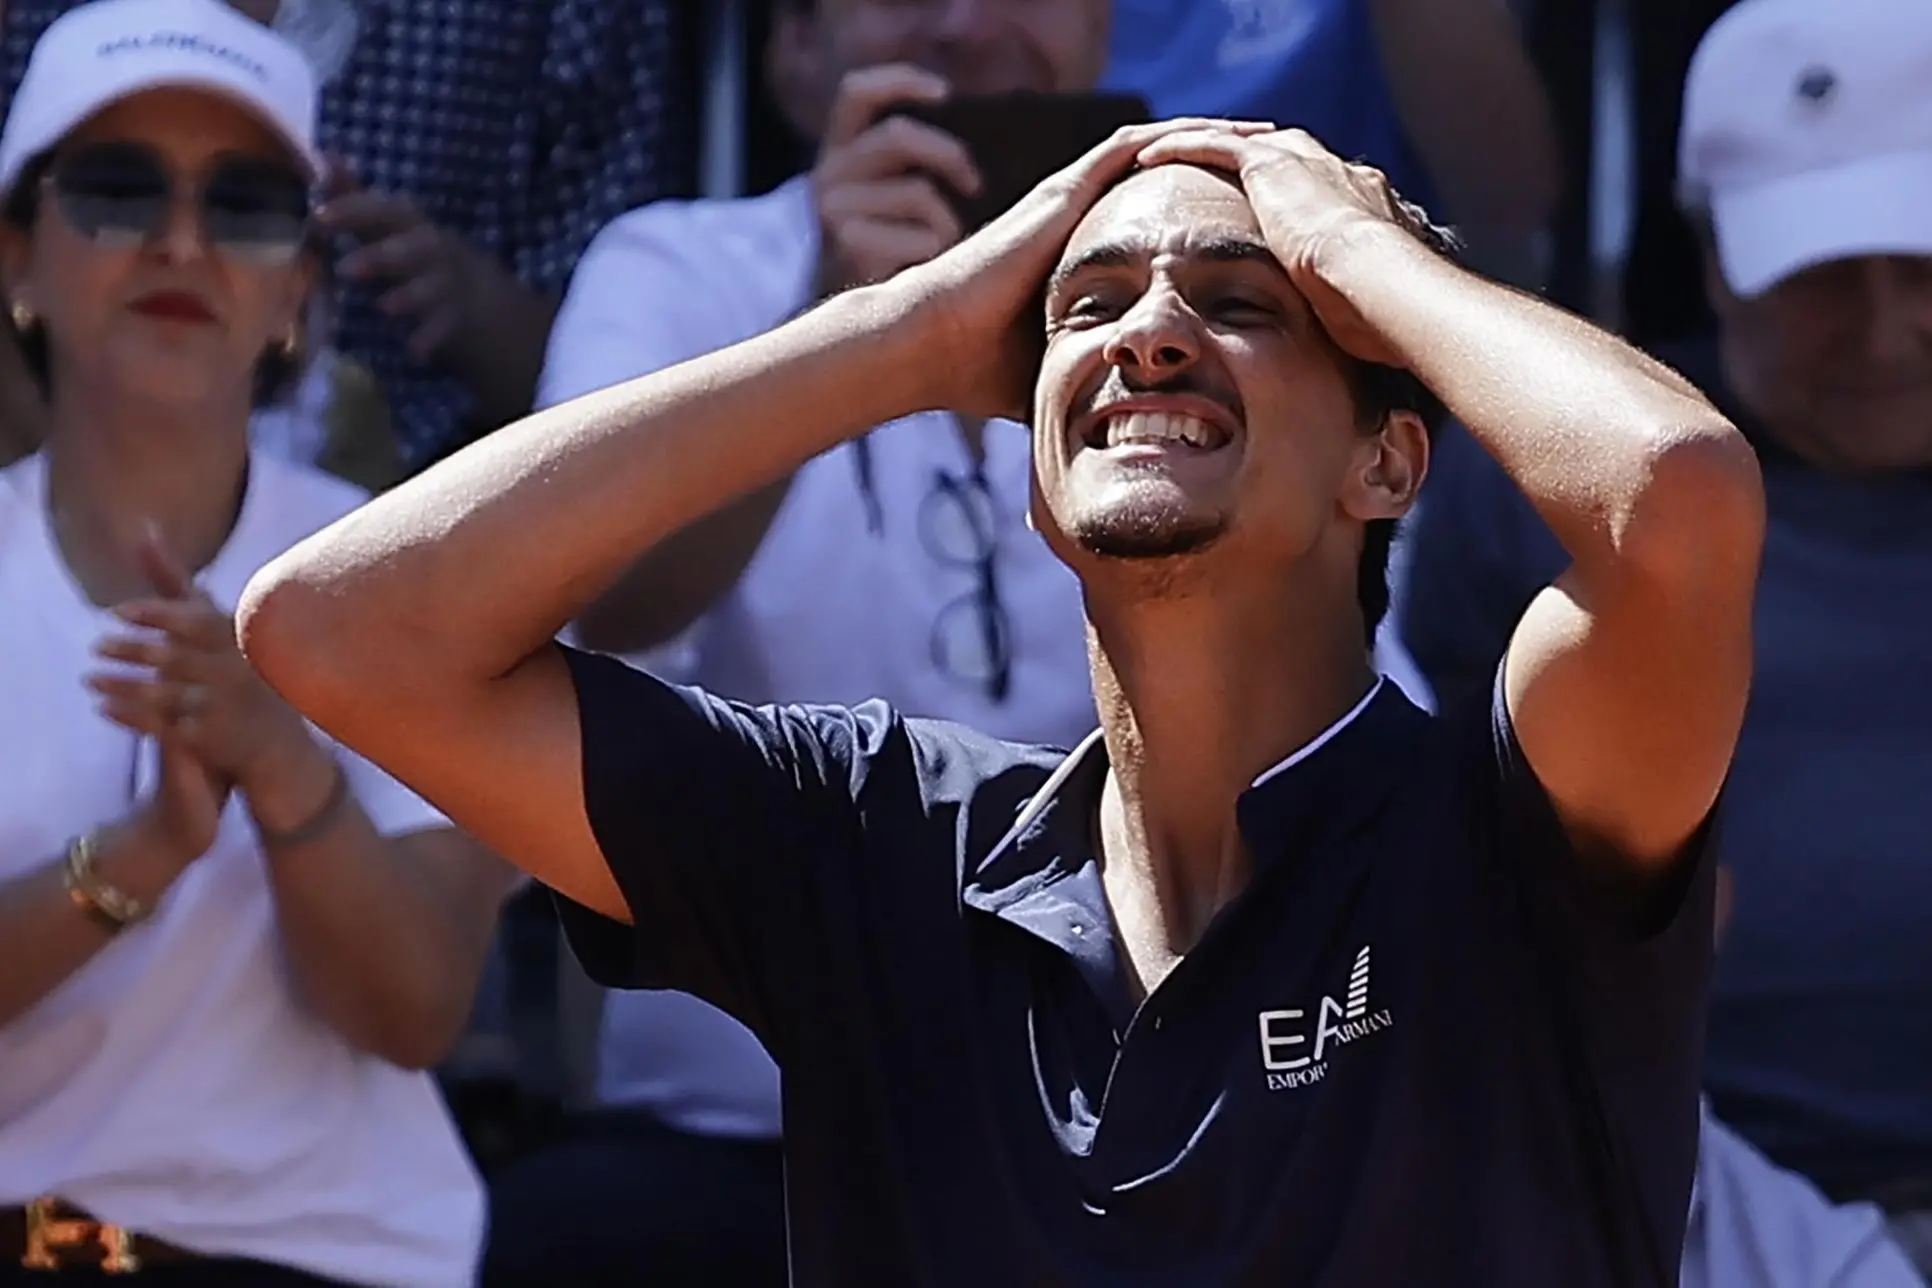 epa10668960 Lorenzo Sonego of Italy celebrates after winning the Men's Singles 3rd round match against Andrey Rublev of Russia during the French Open Grand Slam tennis tournament at Roland Garros in Paris, France, 02 June 2023. Sonego won in five sets. EPA/CHRISTOPHE PETIT TESSON